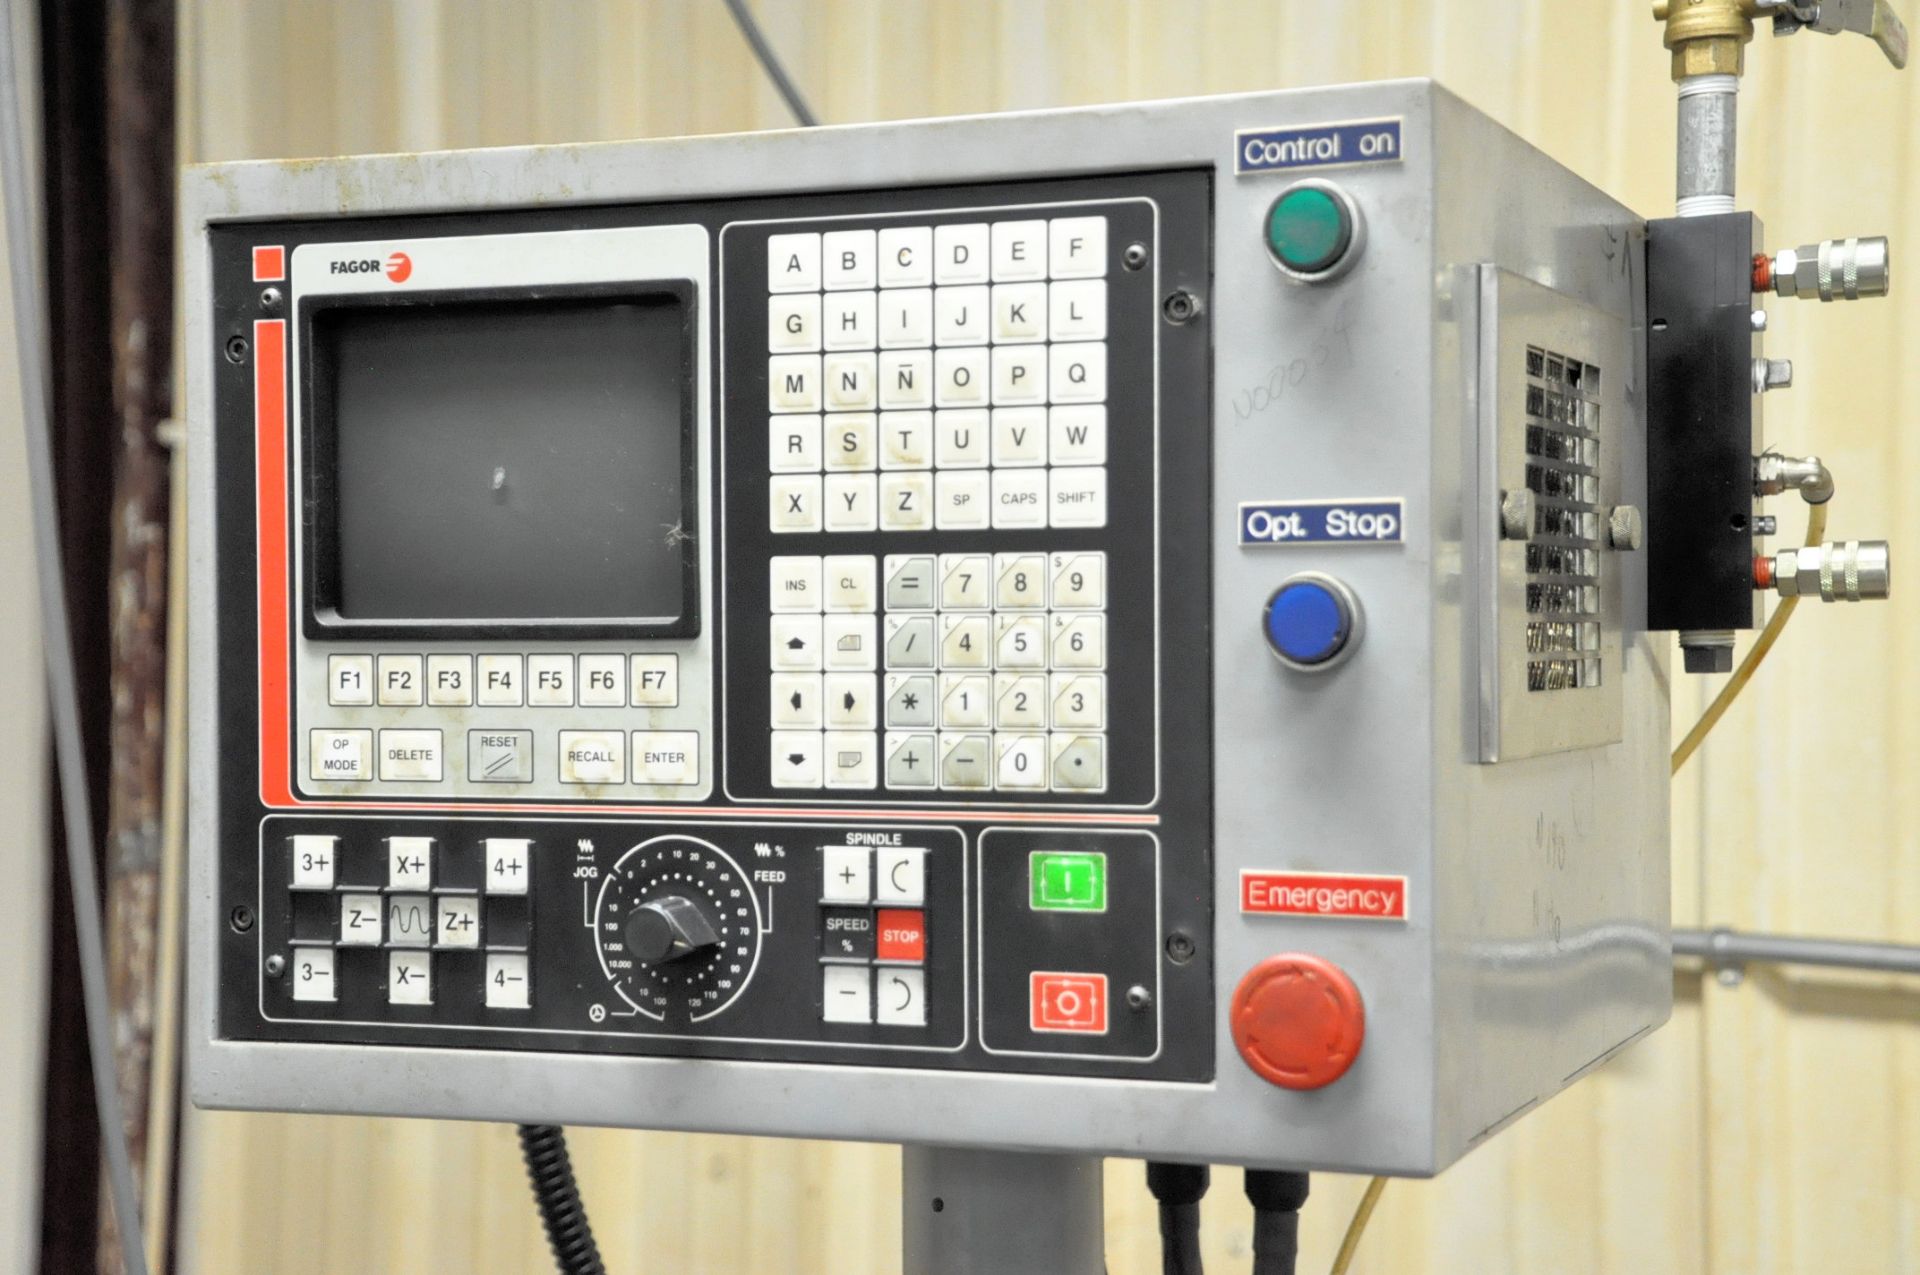 Dynamic Model RS-Accuslide CNC Lathe, S/n DYN-RS-123211-45, Fagor CNC Controller, 2-Axis - Image 5 of 7